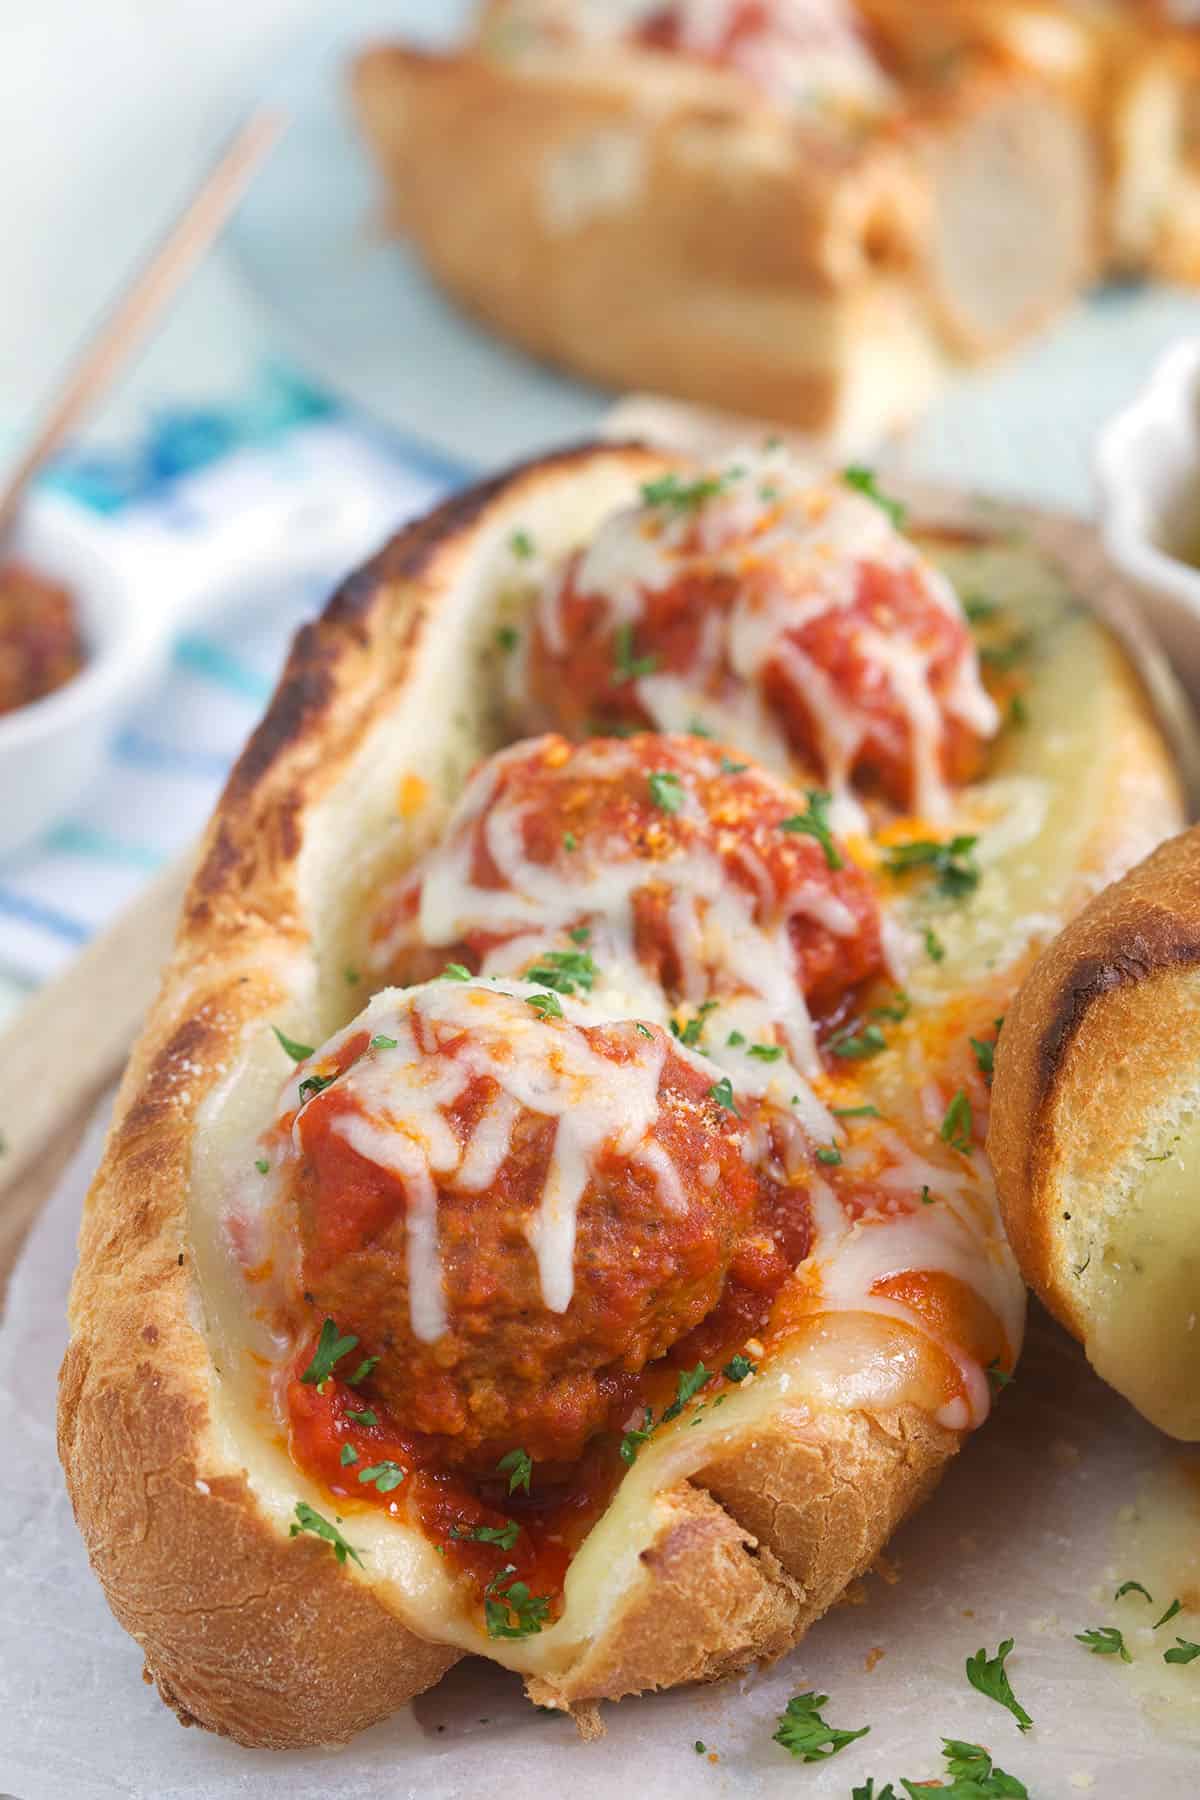 A meatball sub is garnished with fresh parsley. 